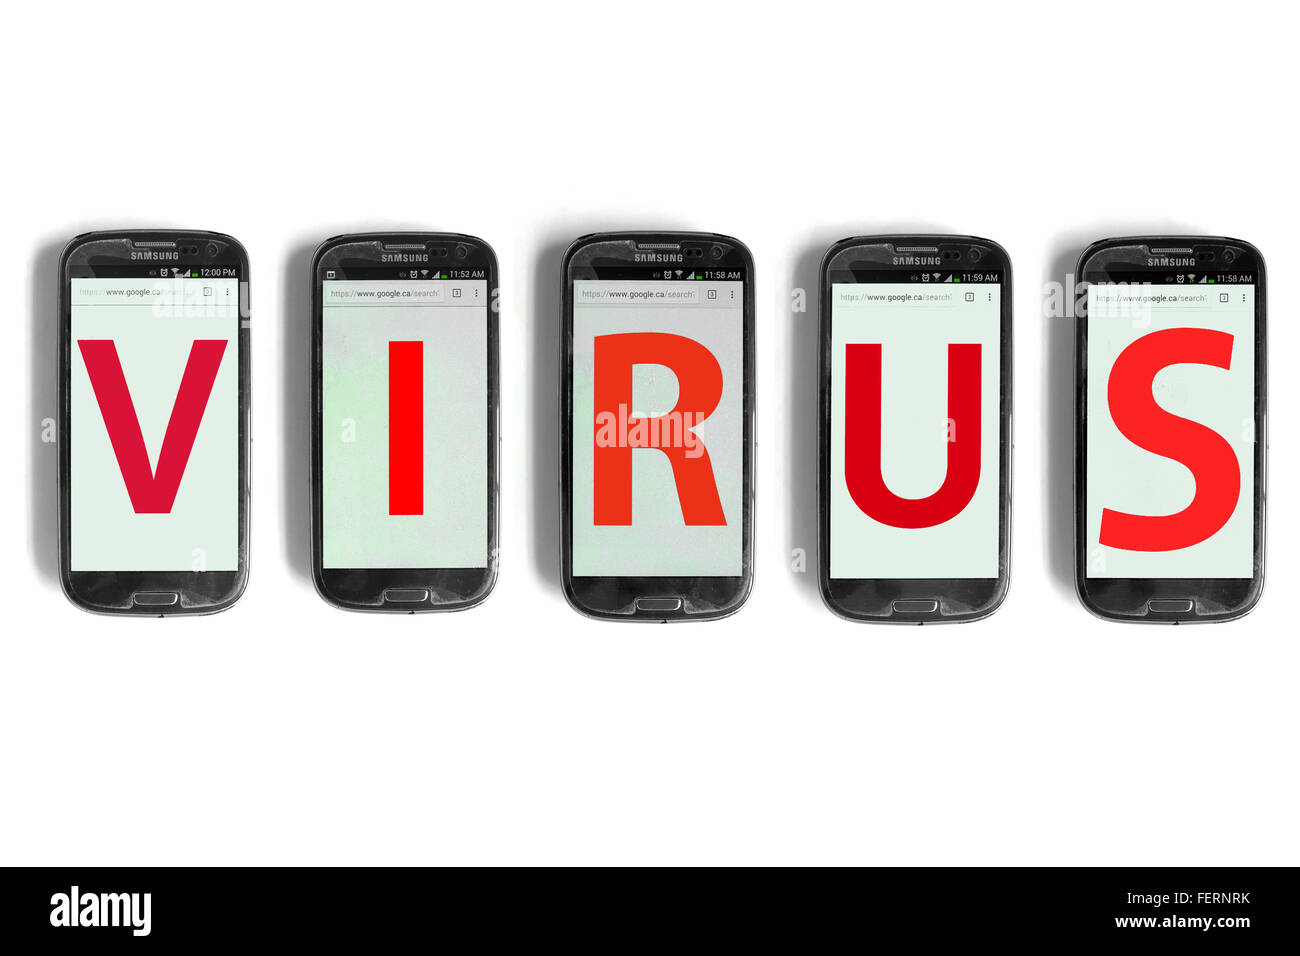 Virus on the screens of smartphones photographed against a white background. Stock Photo